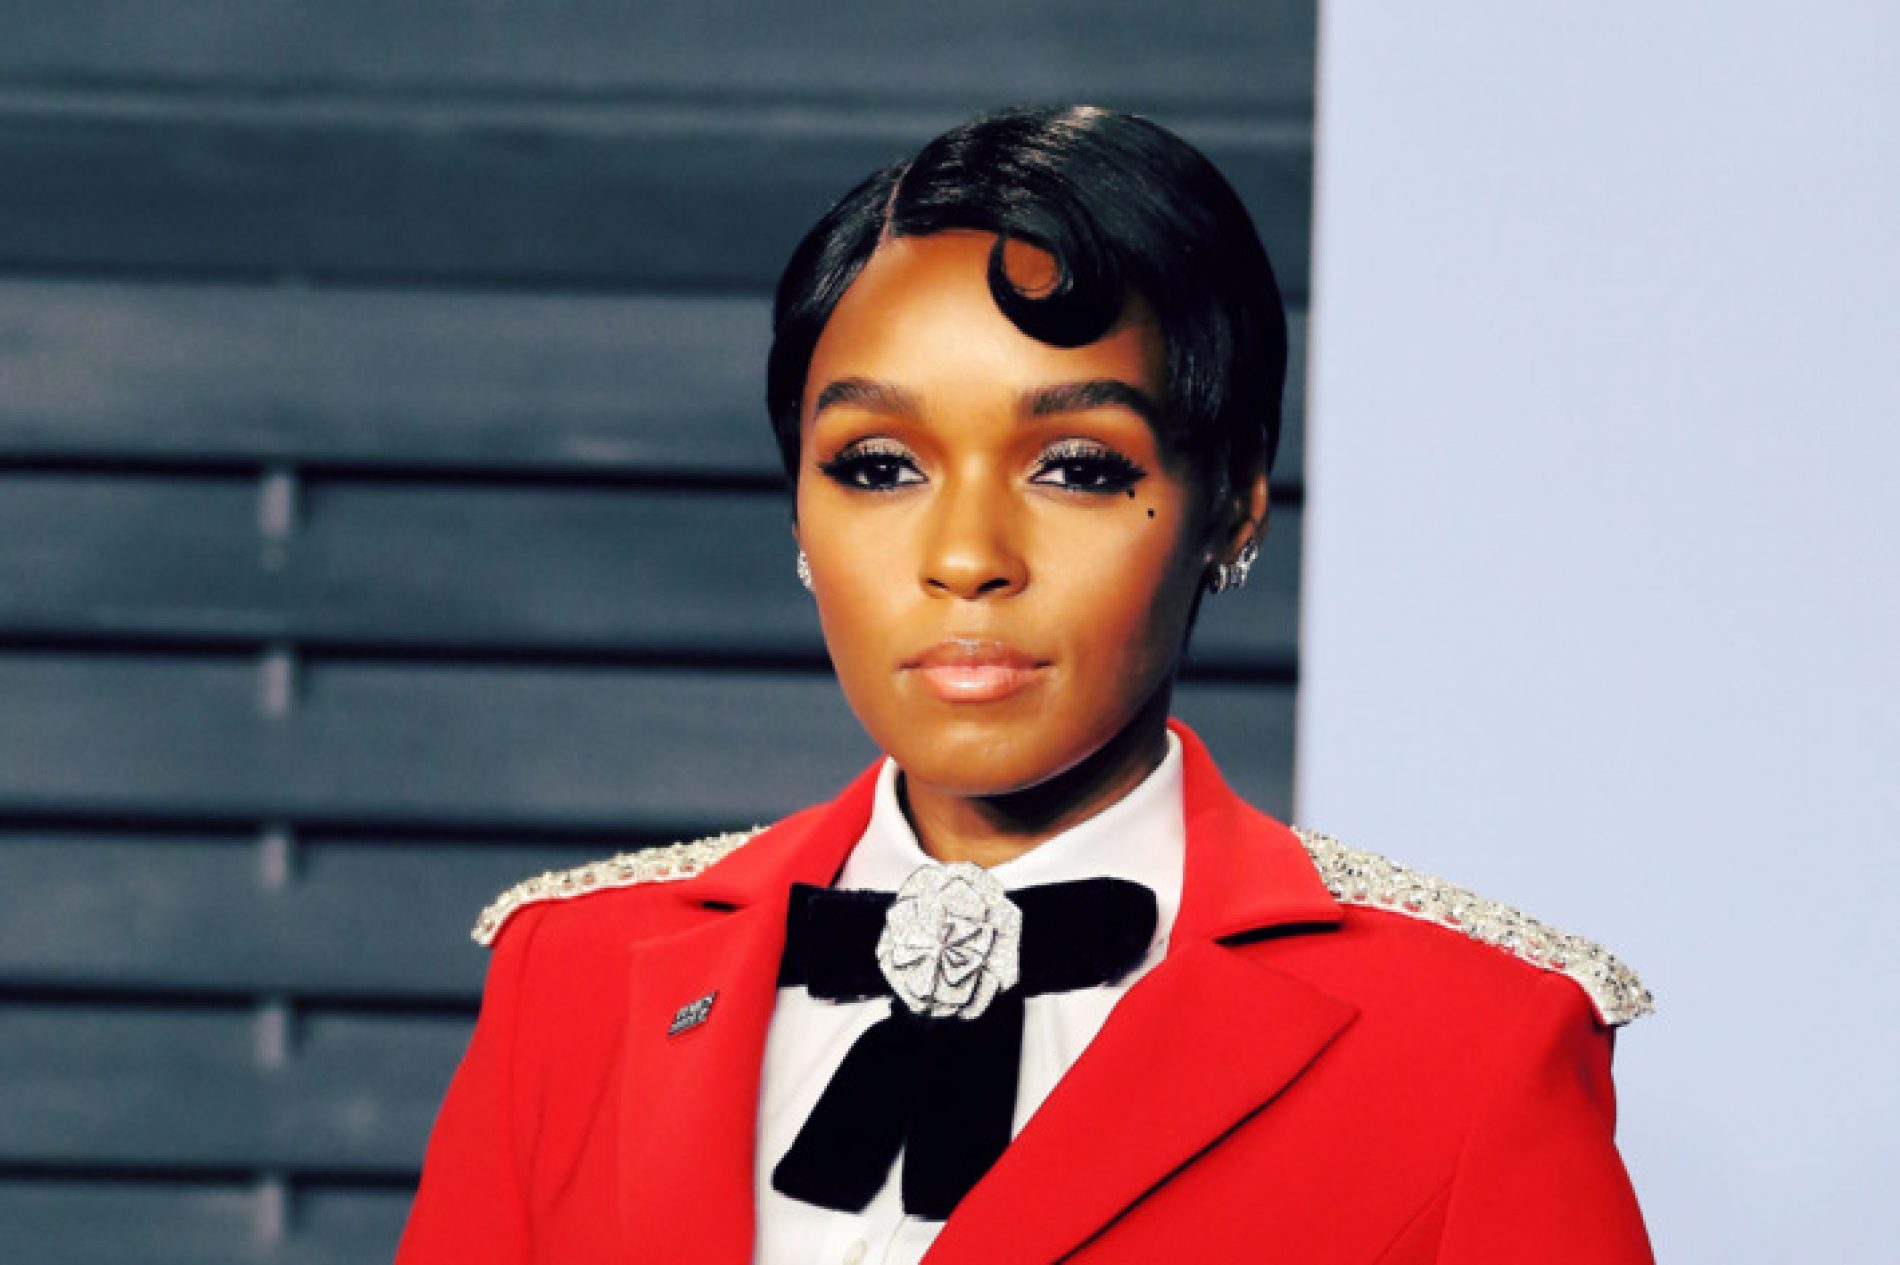 Janelle Monáe comes out as queer